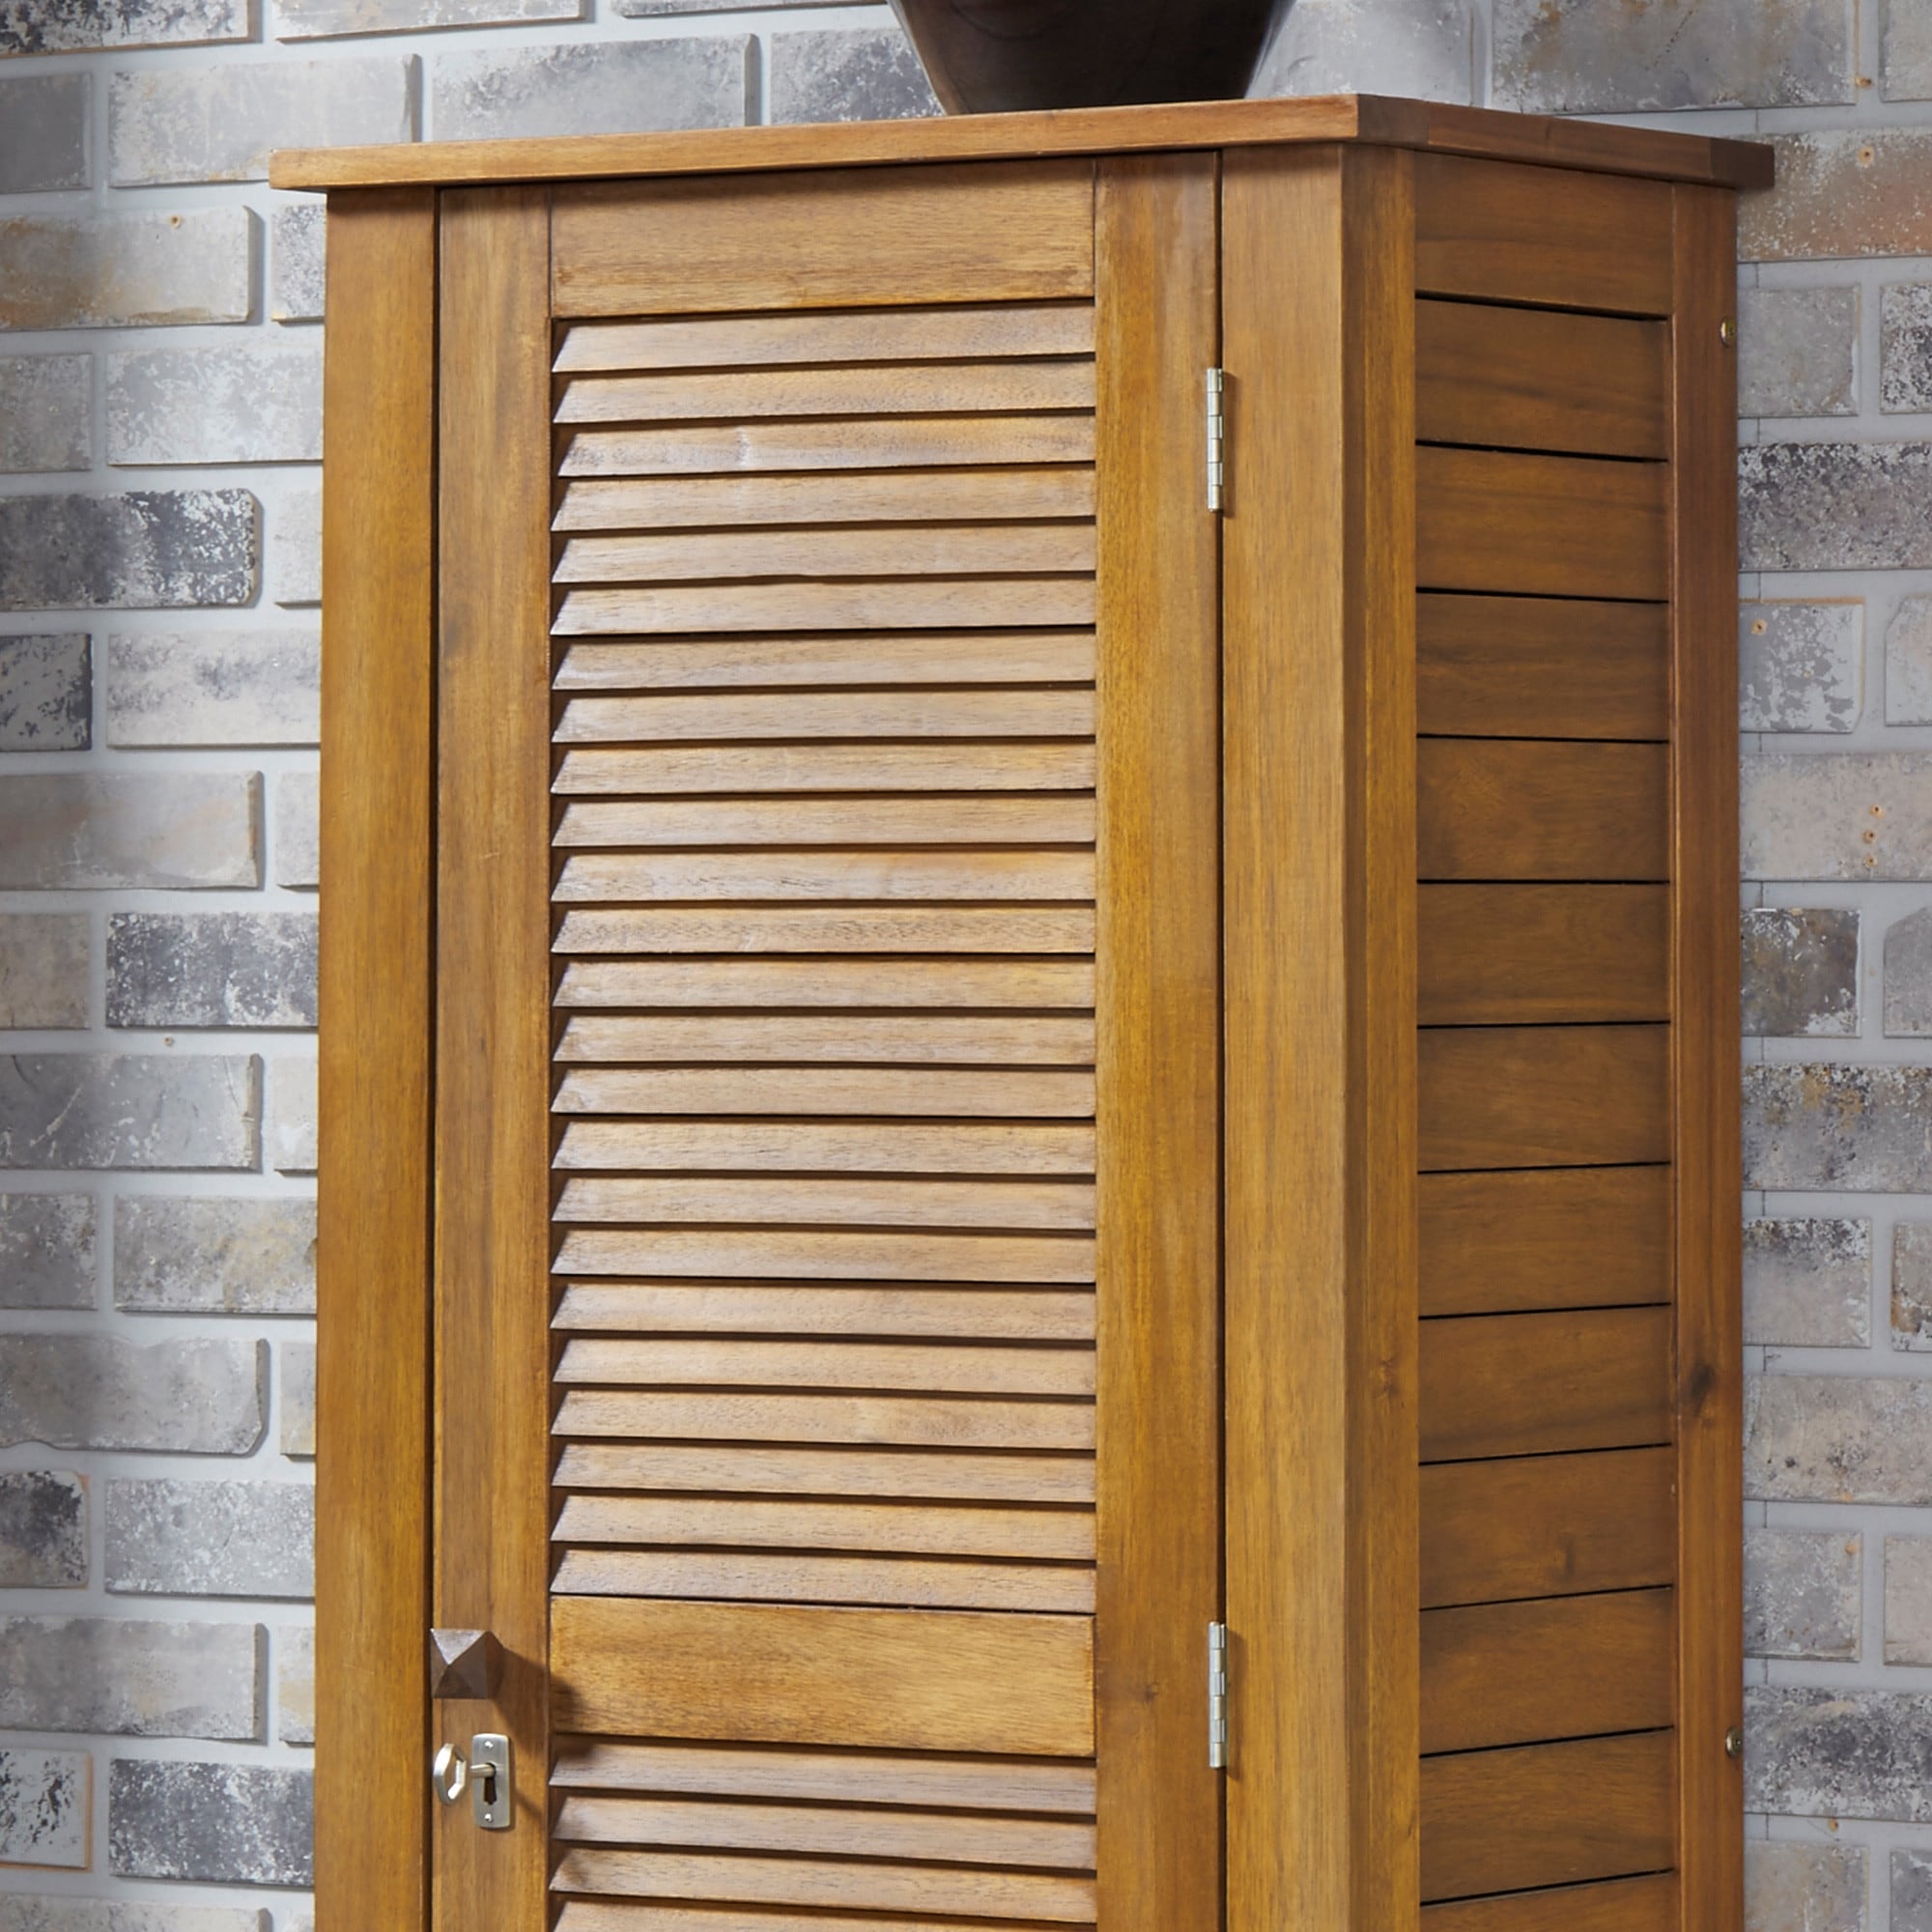 https://ak1.ostkcdn.com/images/products/is/images/direct/1d1cedabf0b0802f8879d6be38ef9c3dfb121b40/Maho-Outdoor-Golden-Teak-Single-Door-Storage-Cabinet.jpg